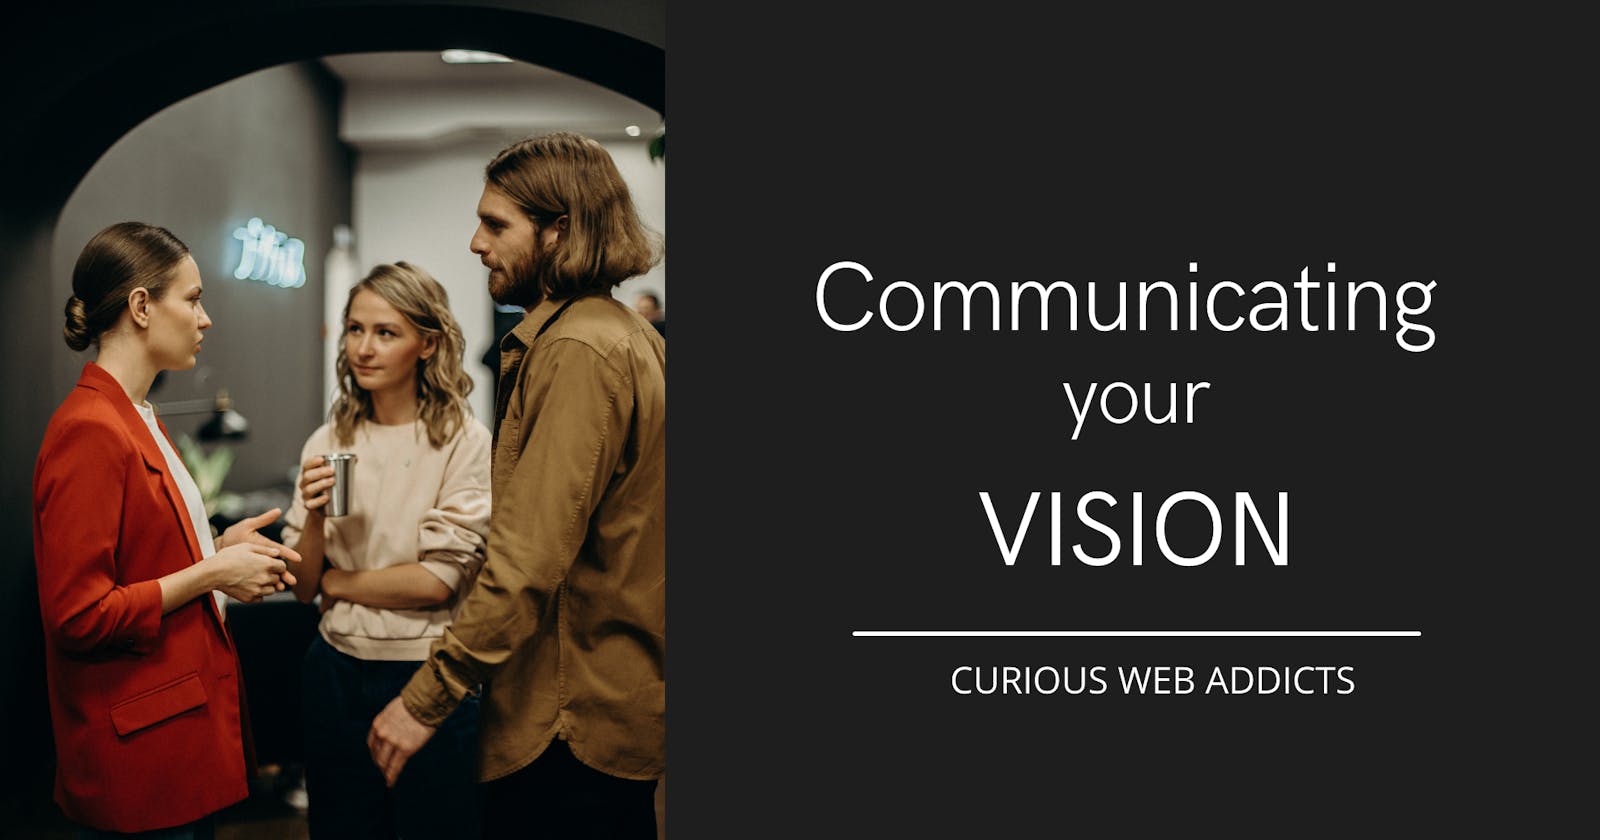 Communicating your Vision